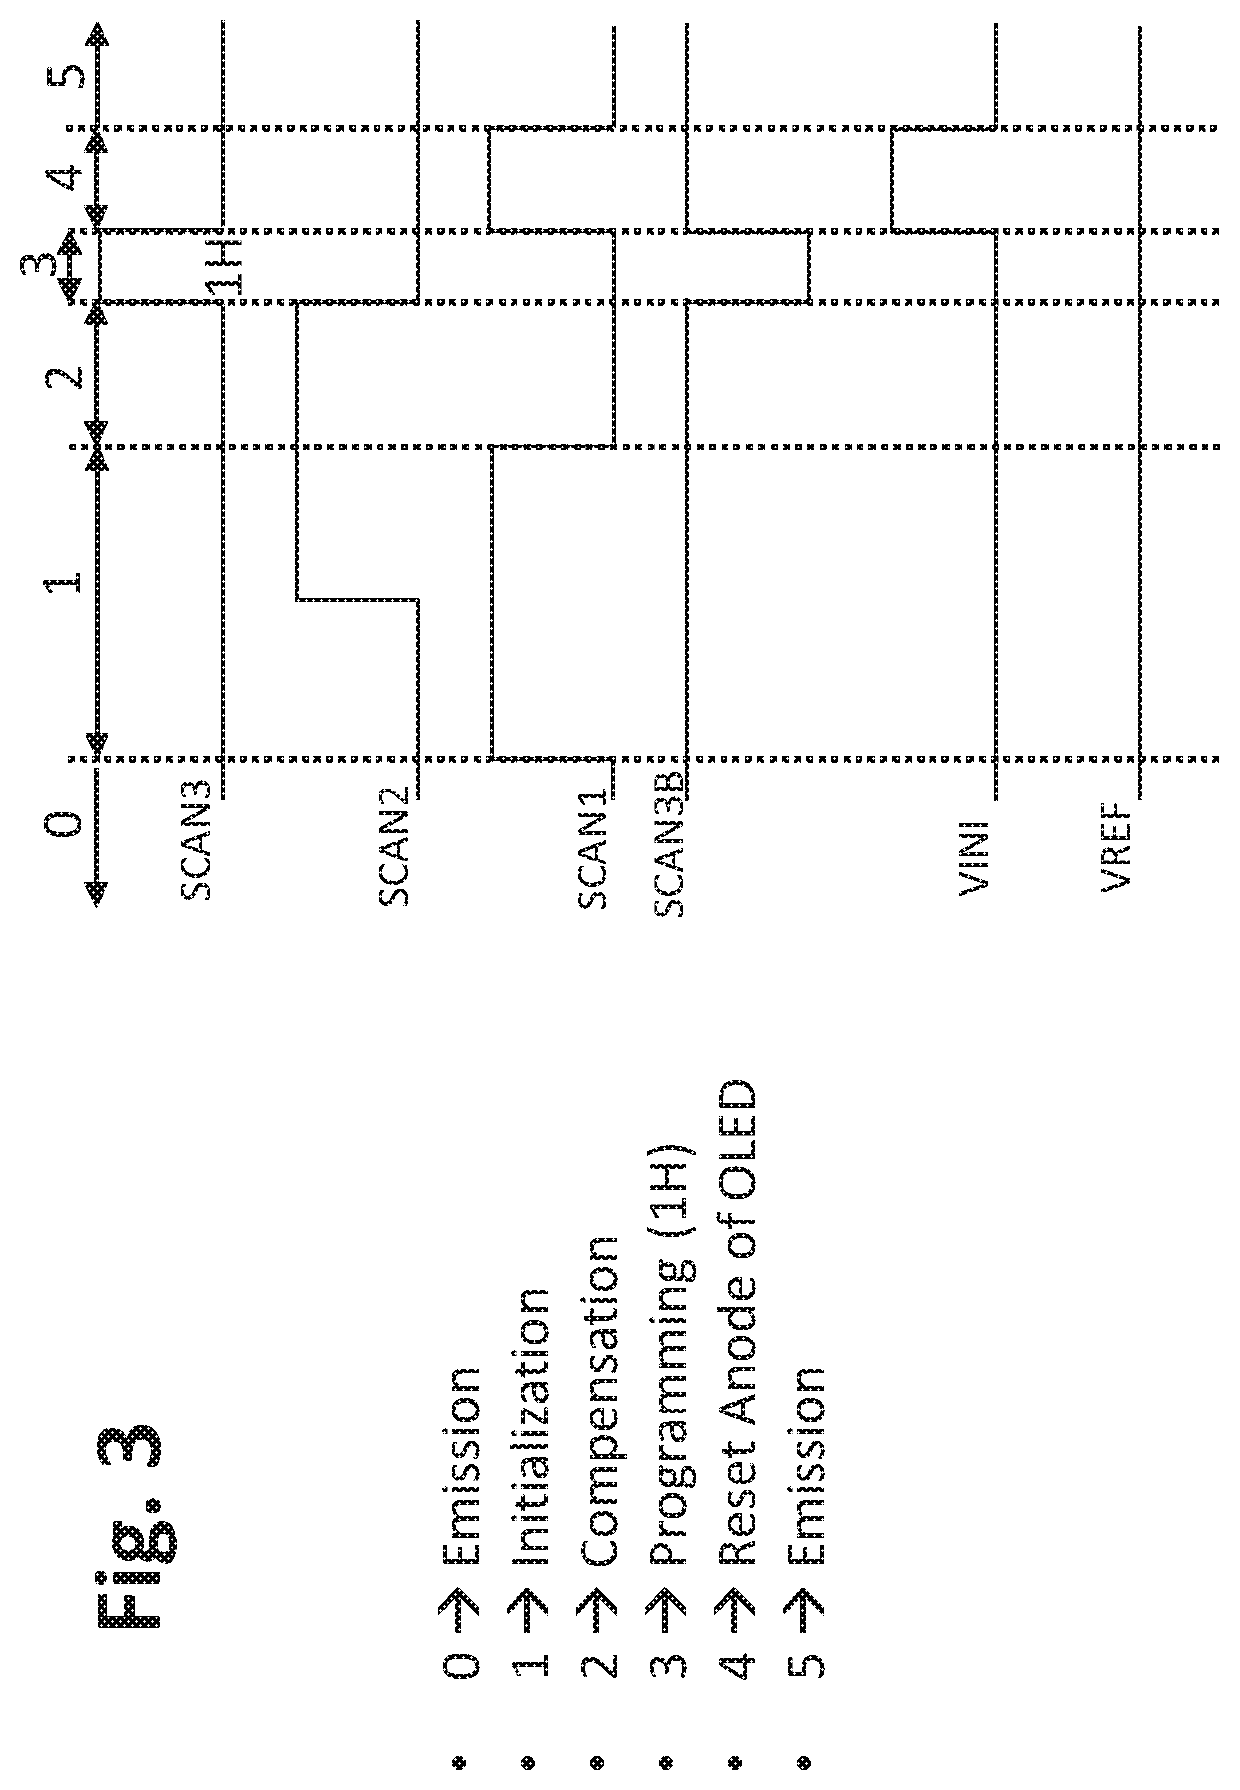 TFT pixel threshold voltage compensation circuit using a variable capacitor